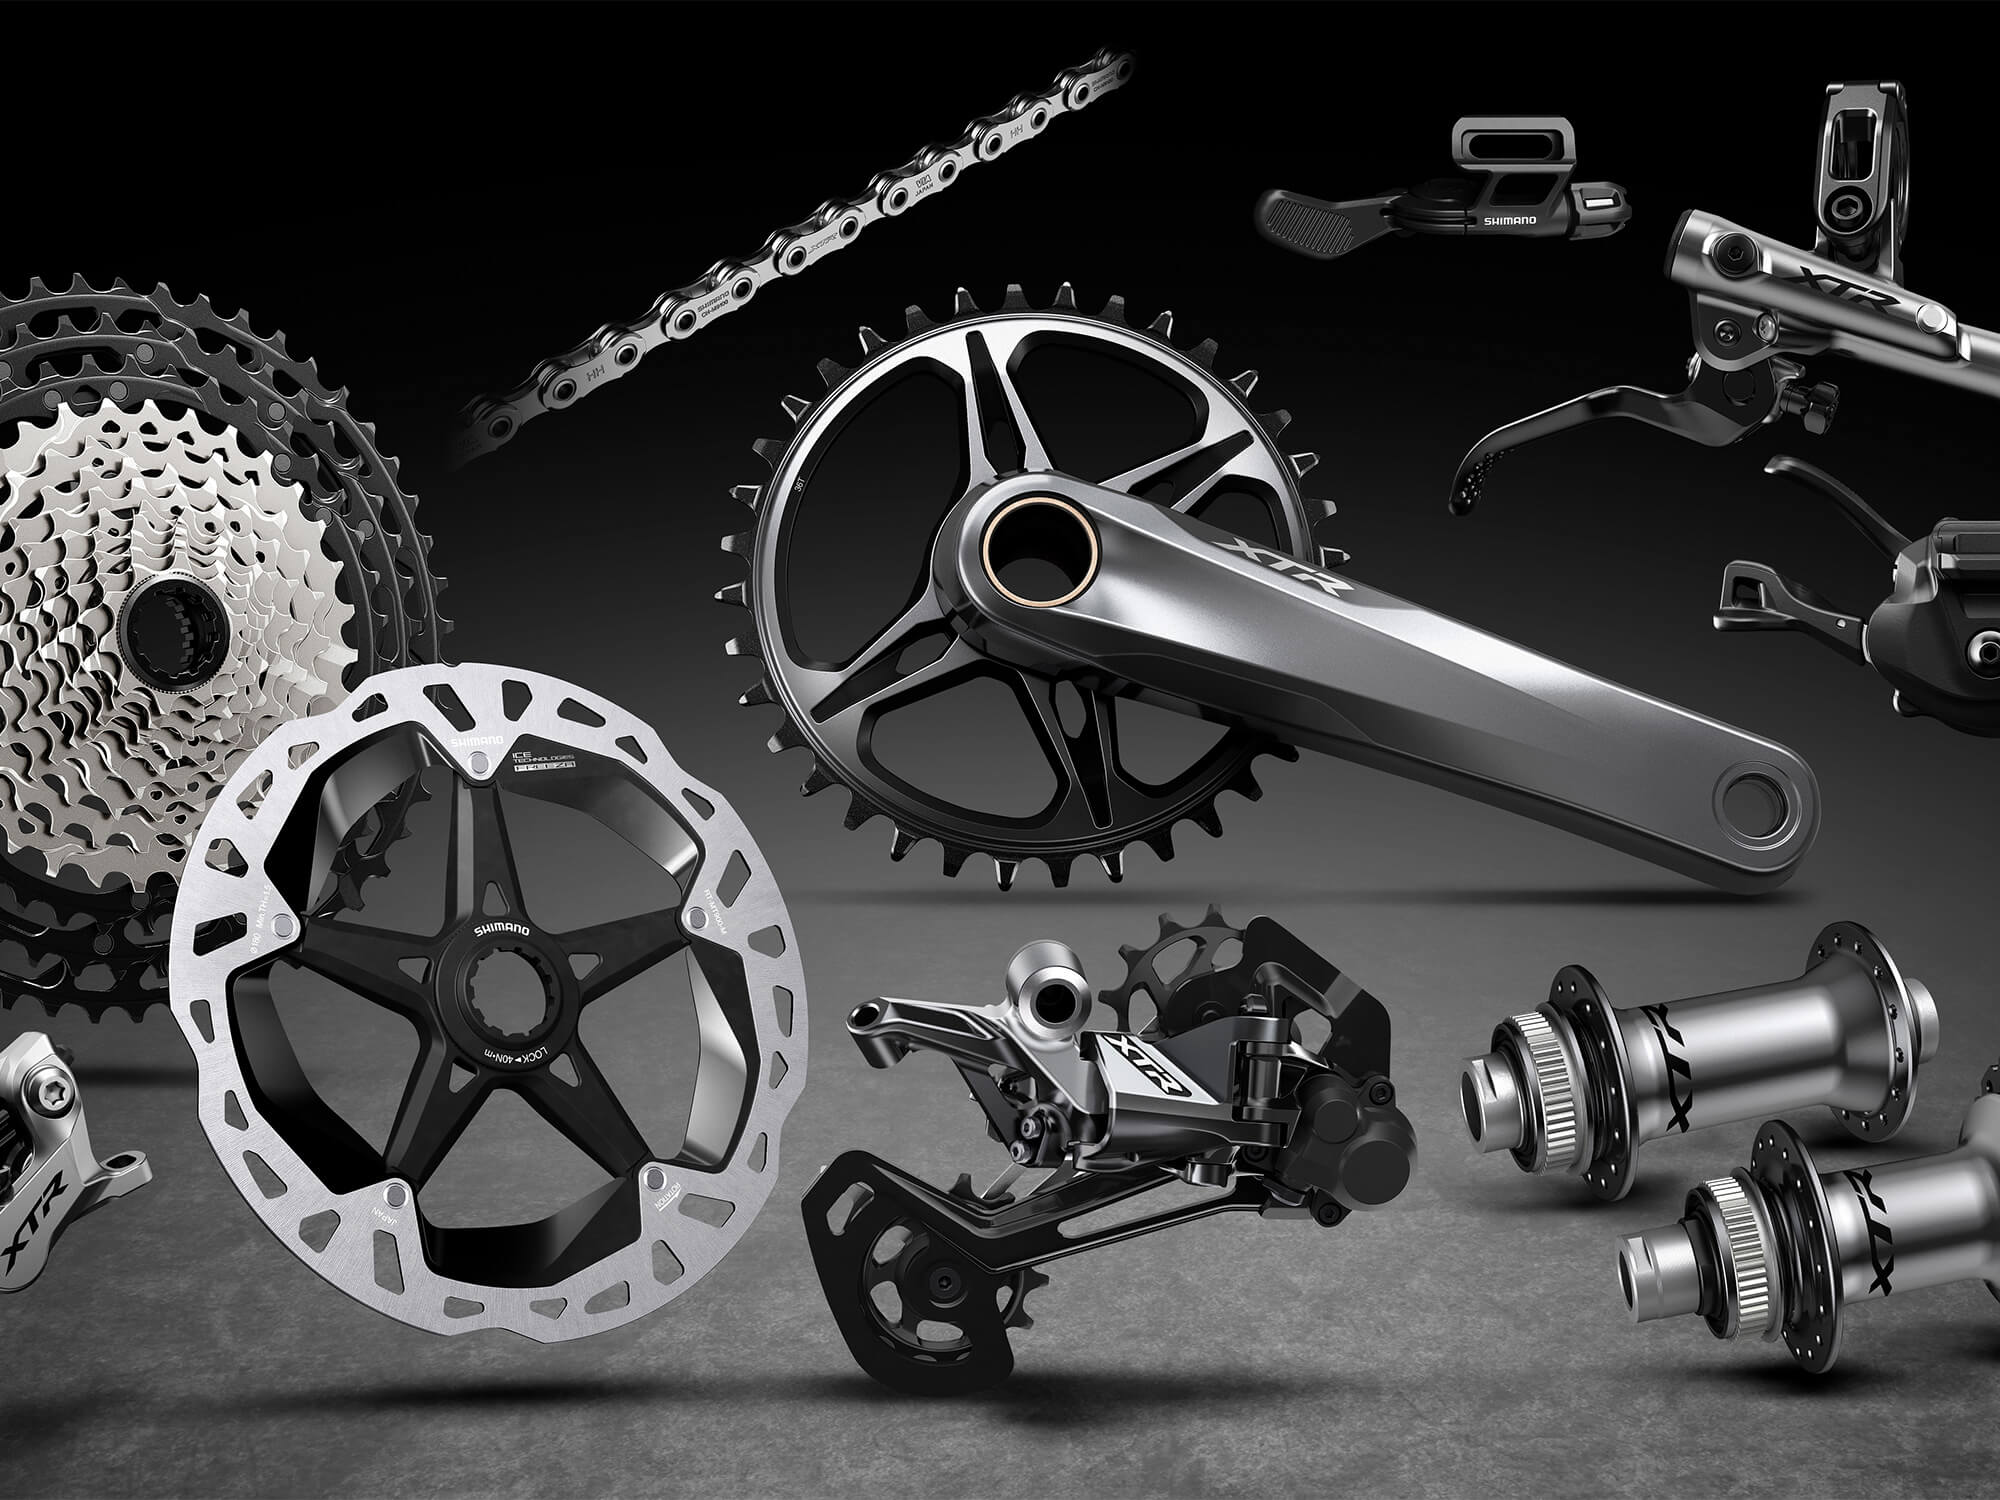 Bicycle Parts